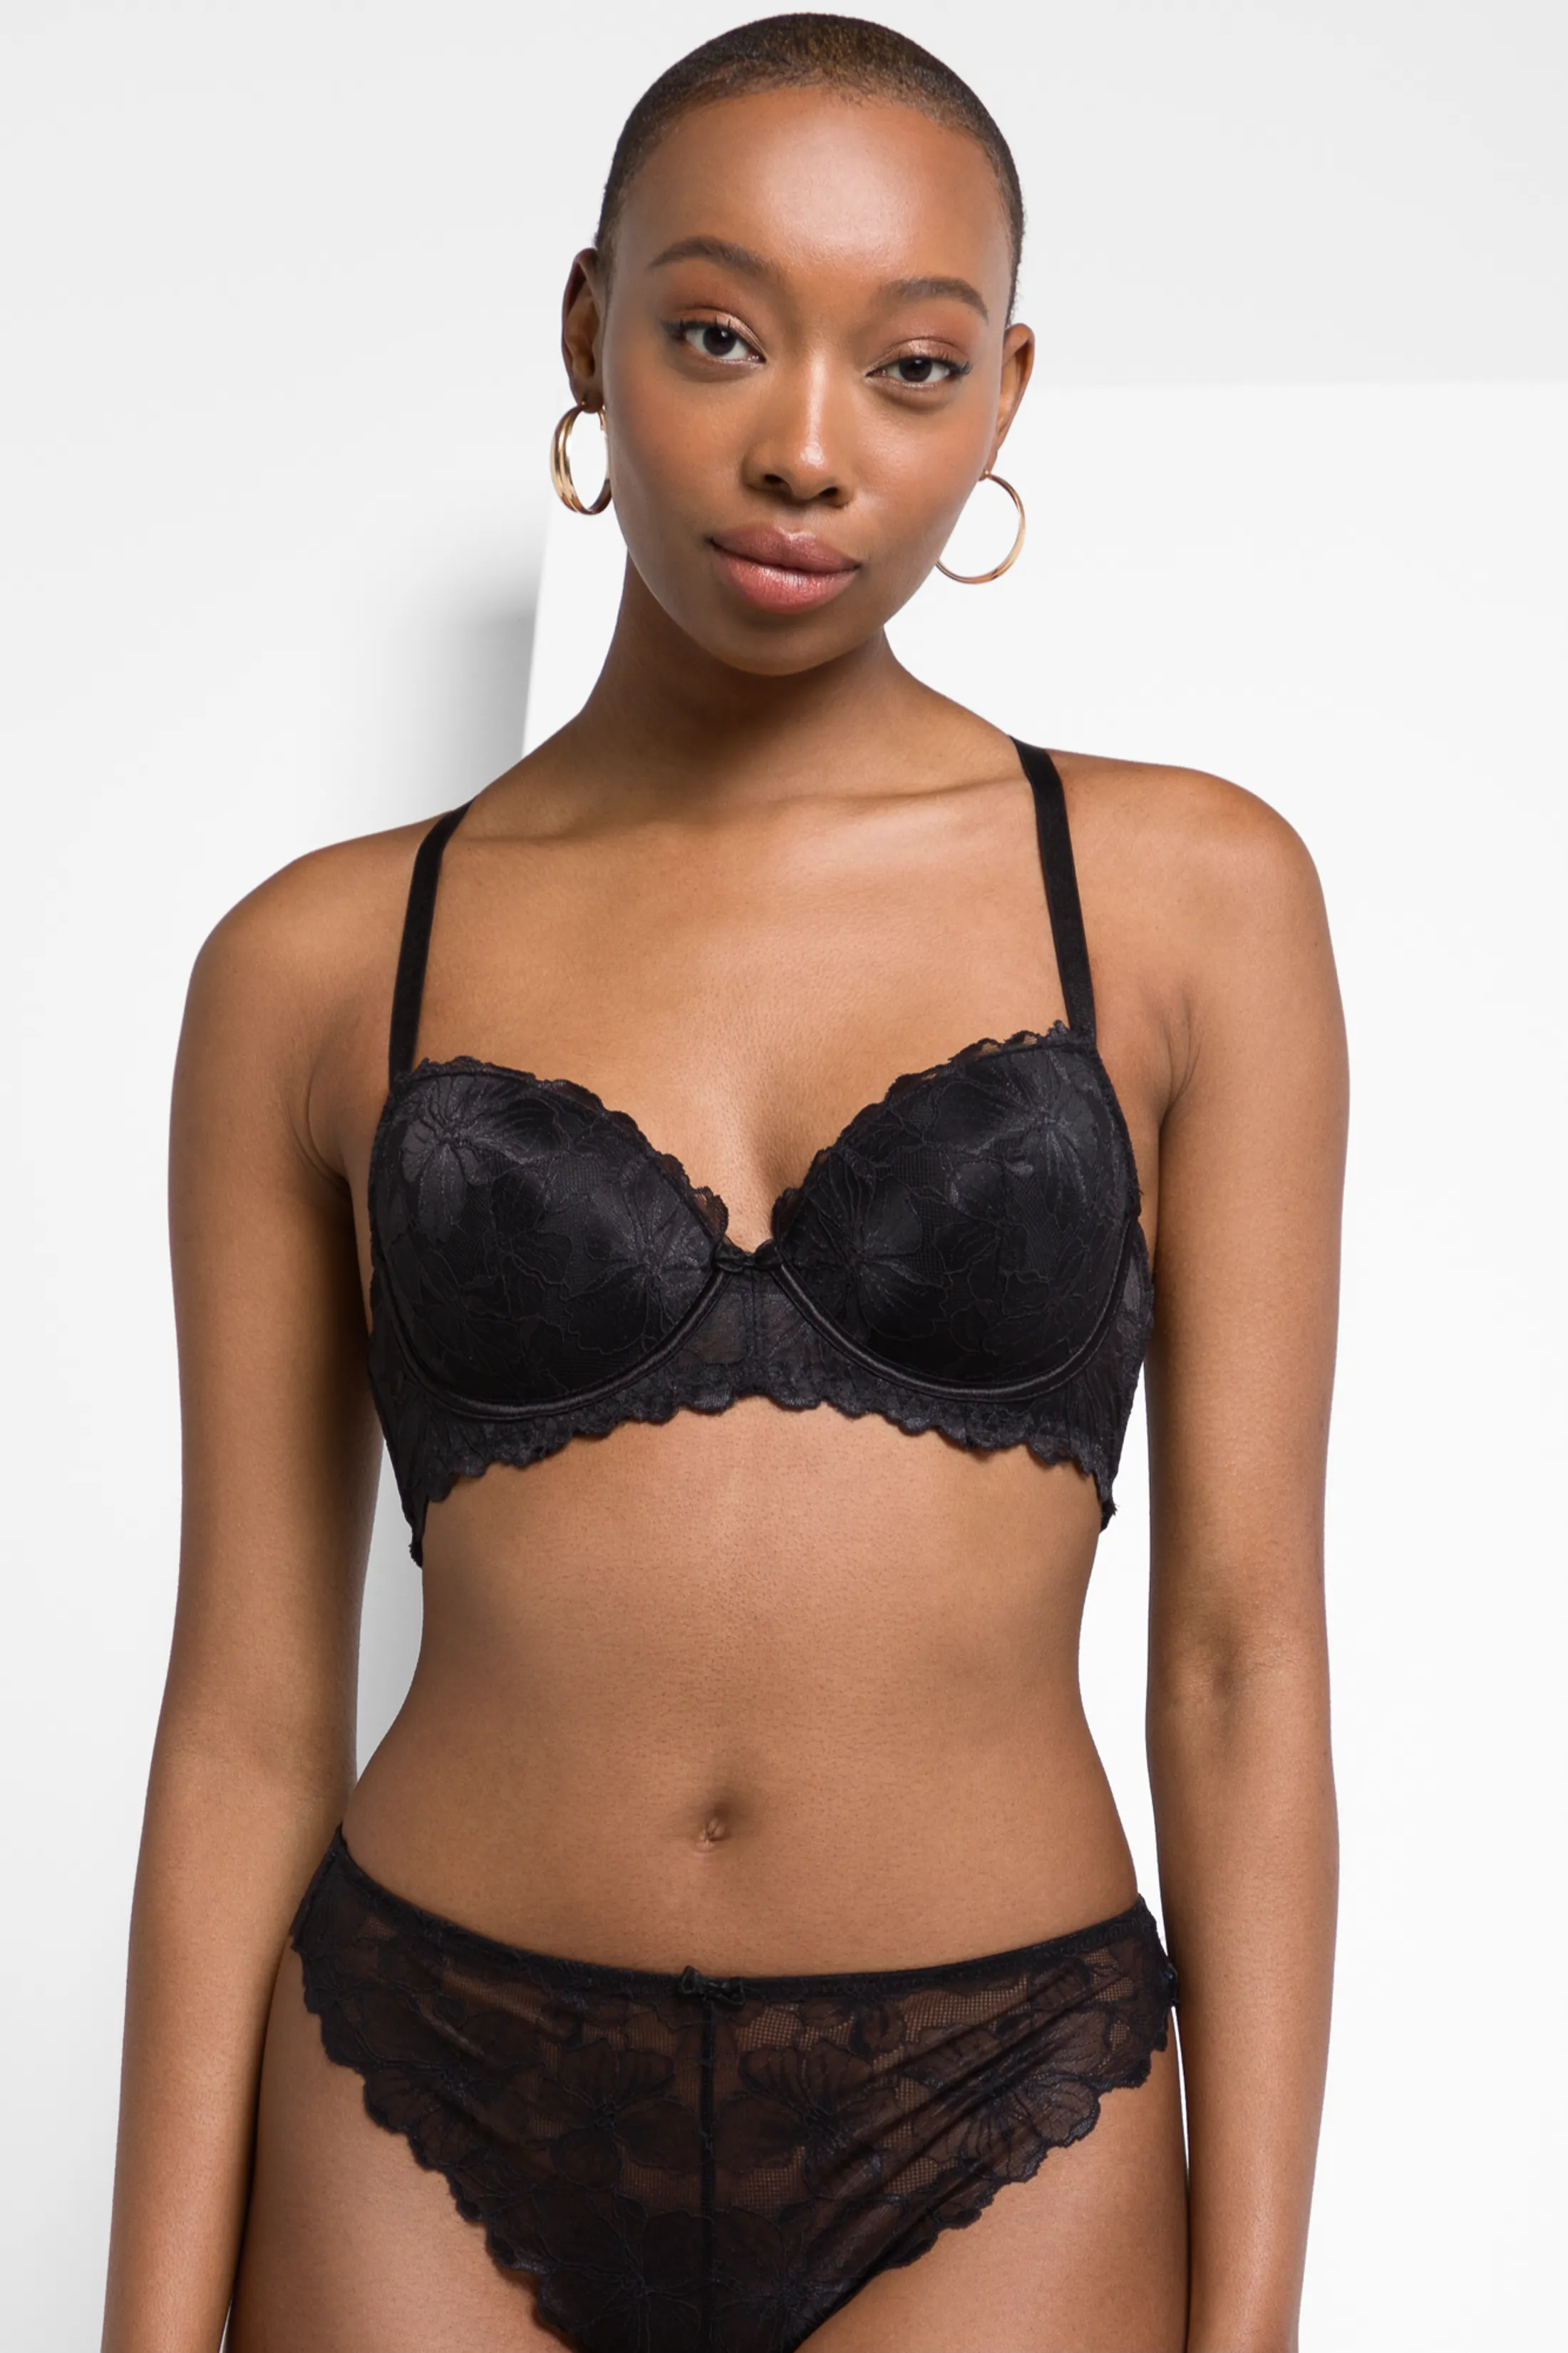 Women's fashion - Buy clothing, shoes & lingerie online at Ackermans